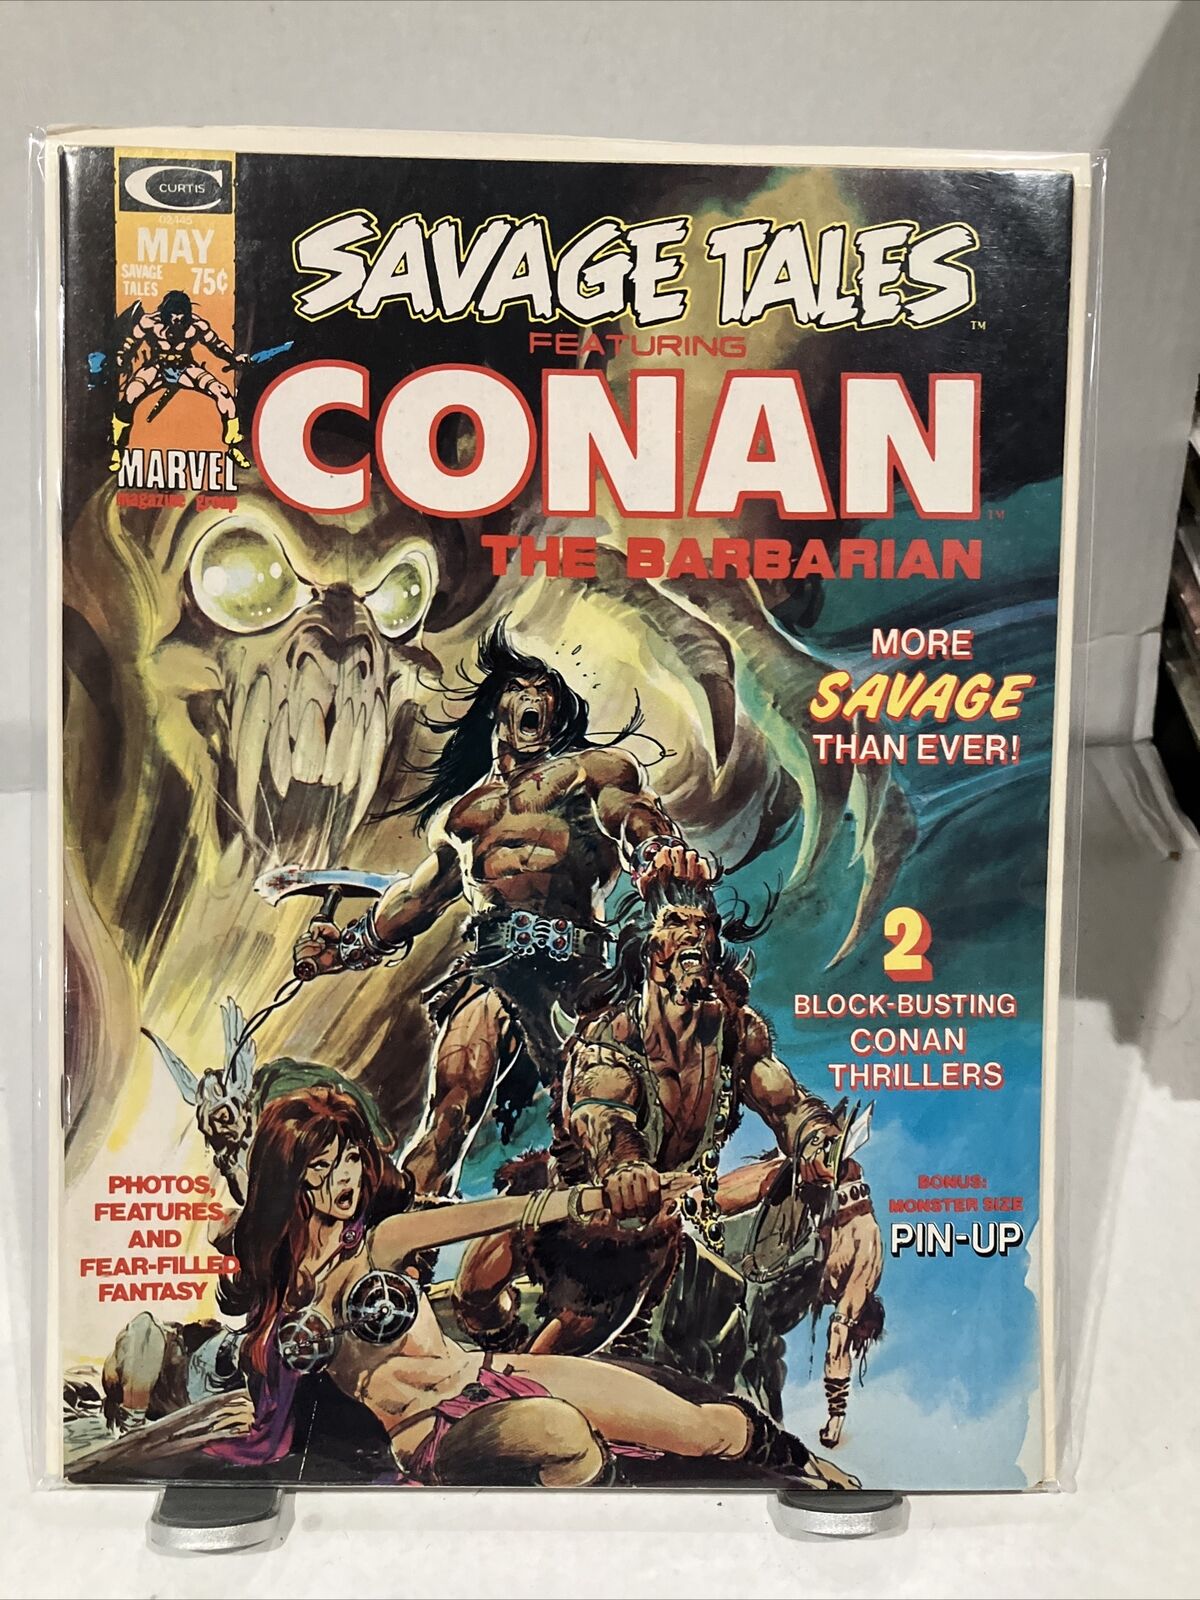 1974 MAY VOL 1 ISSUE 4 SAVAGE TALES FEATURING CONAN THE BARBARIAN COMIC